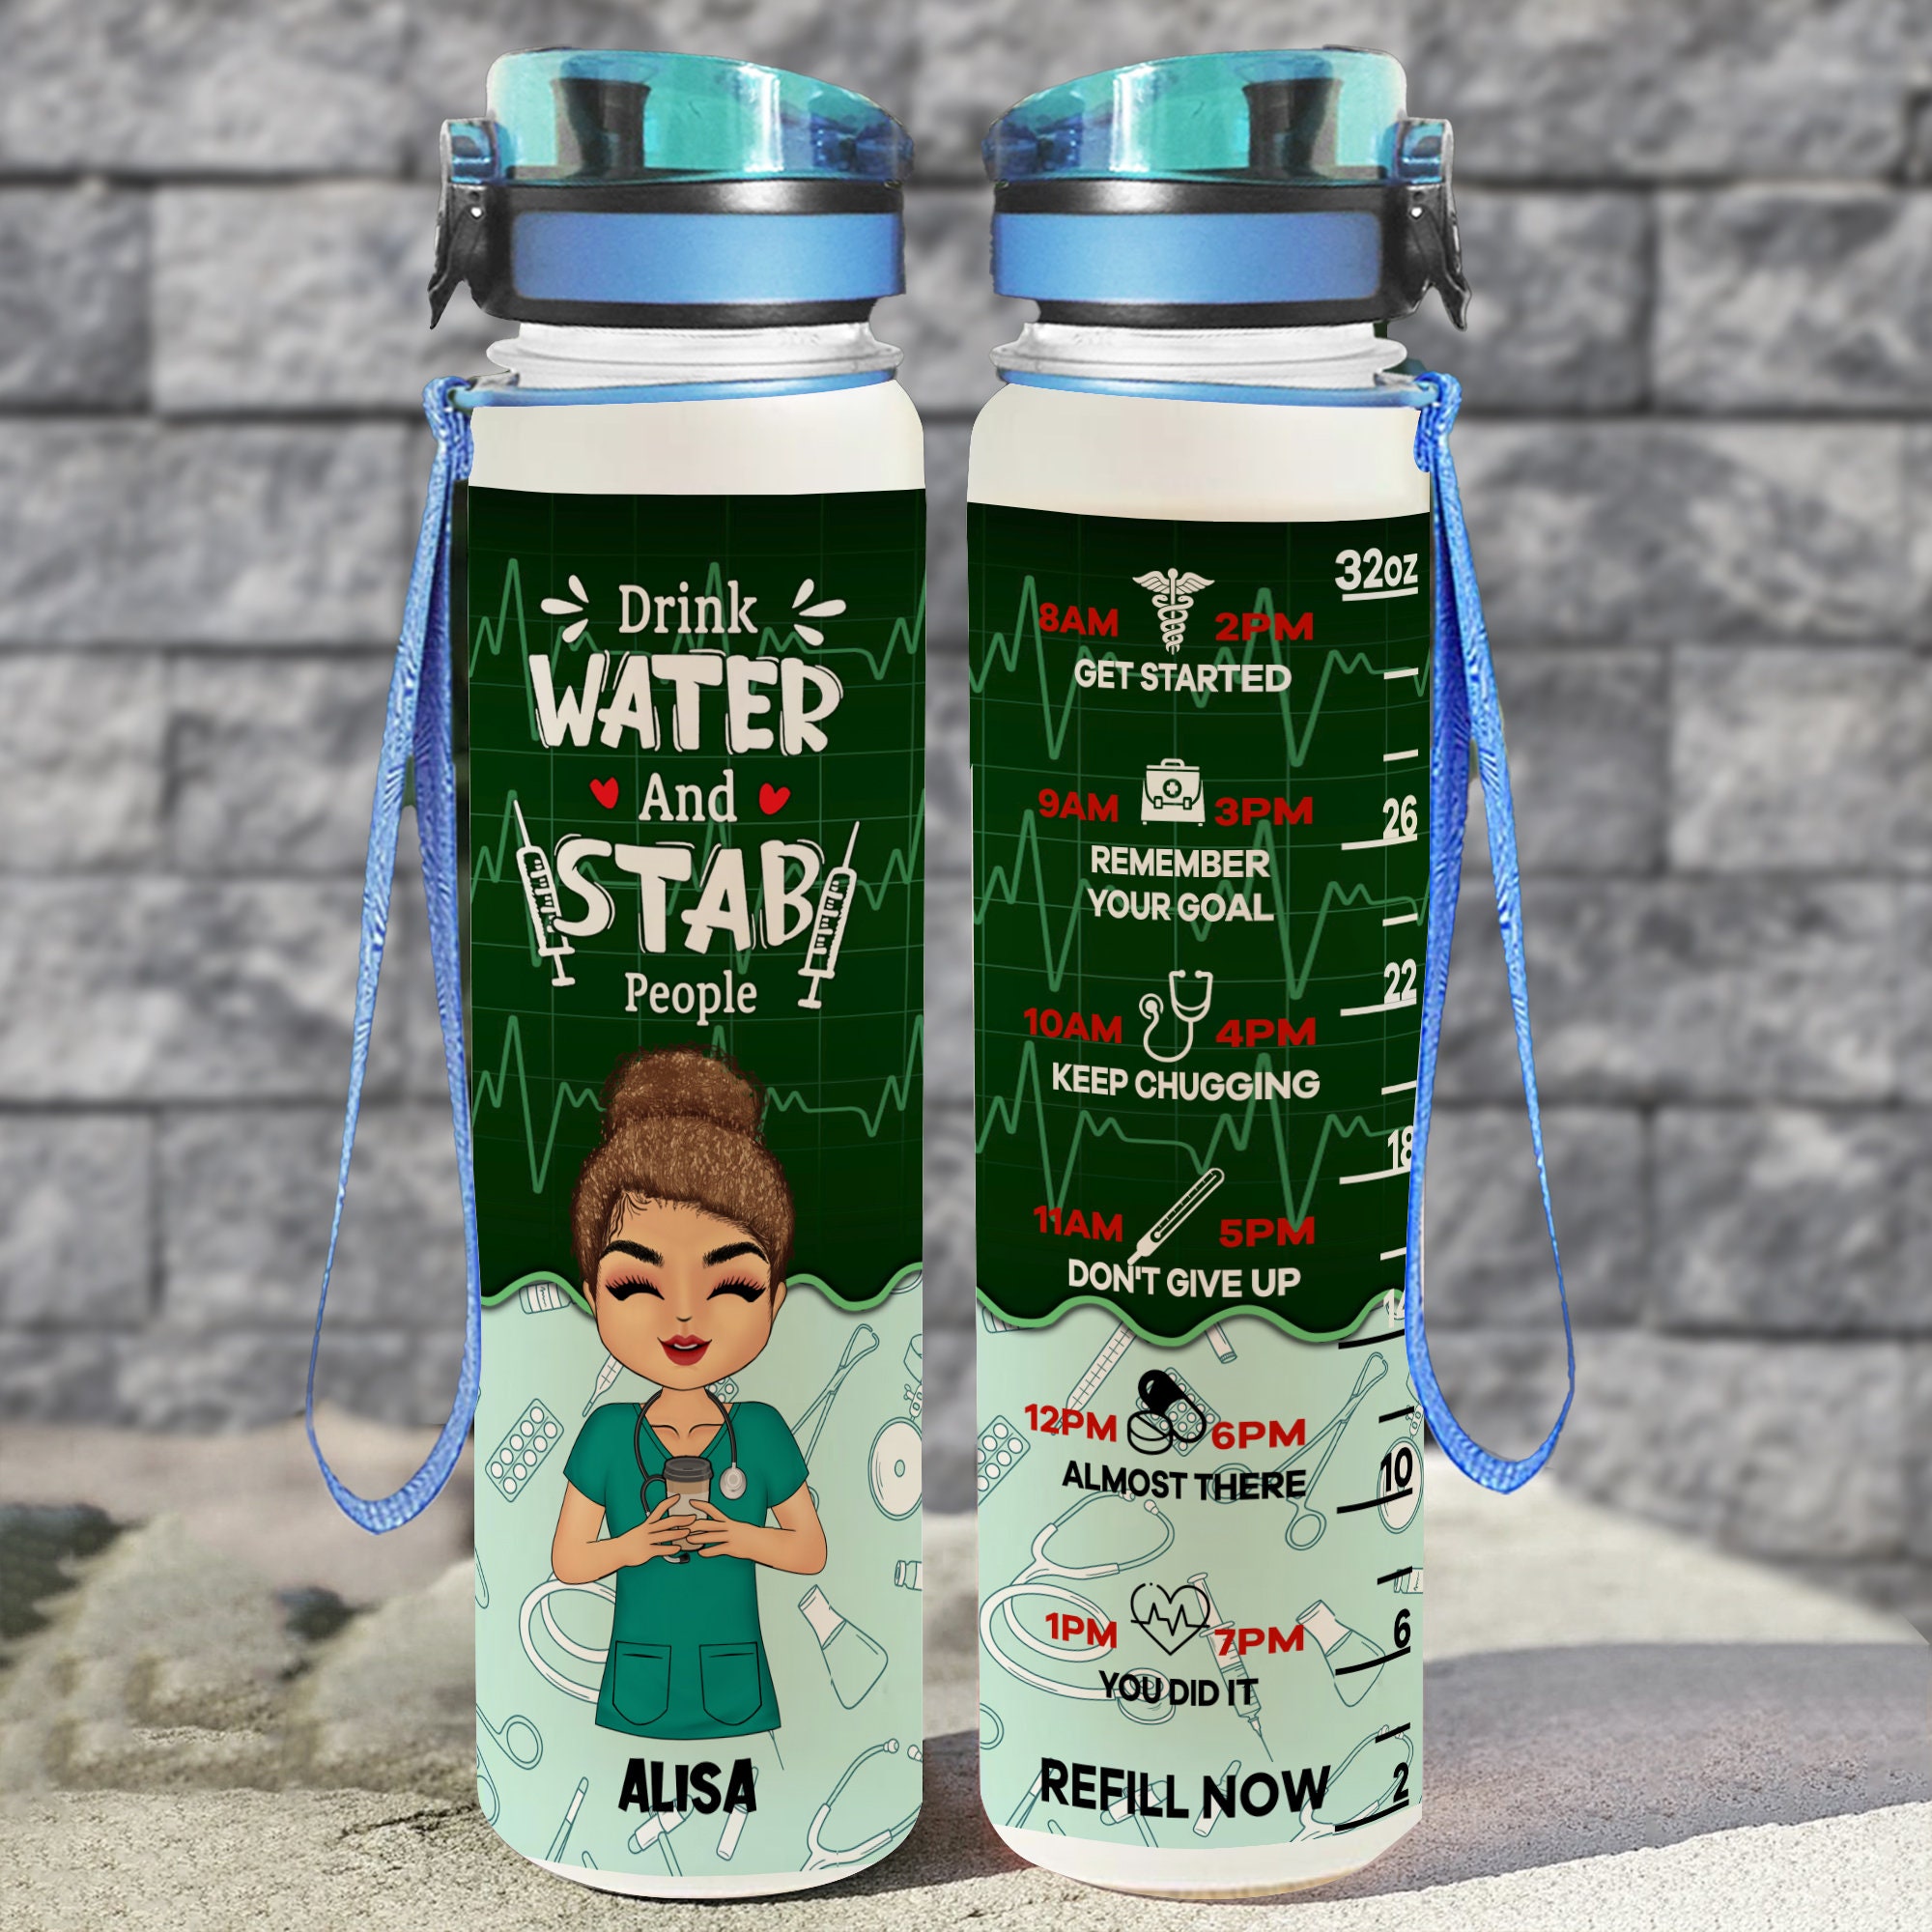 NURSE - Keep Strong Stay Hydrated - Personalized Water Tracker Bottle